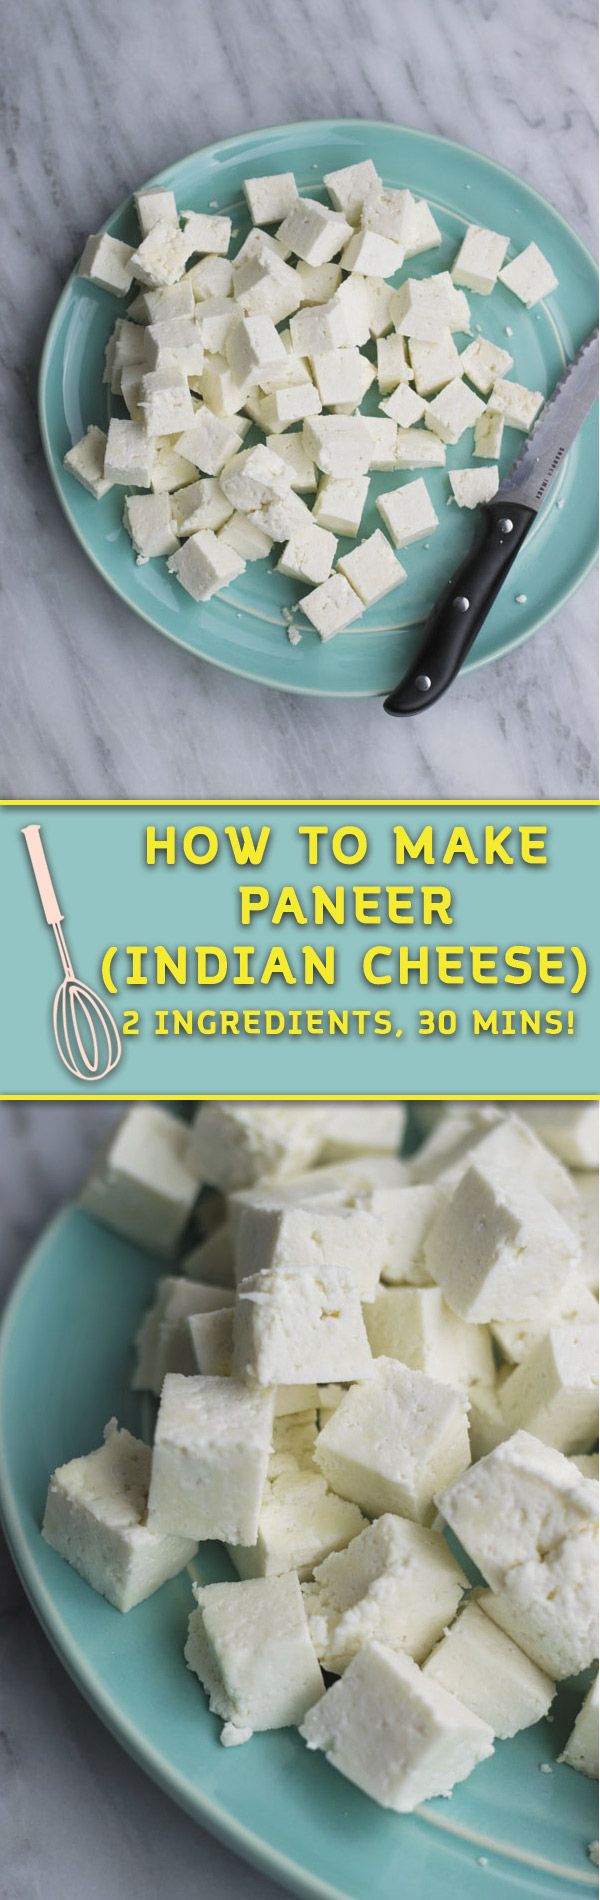 how to make paneer - just 2 ingredients & 30 mins is all you need to make paneer at home! So many delicious ways to eat this cheese & it's way cheaper to make at home! Store in freezer for upto 4 months!